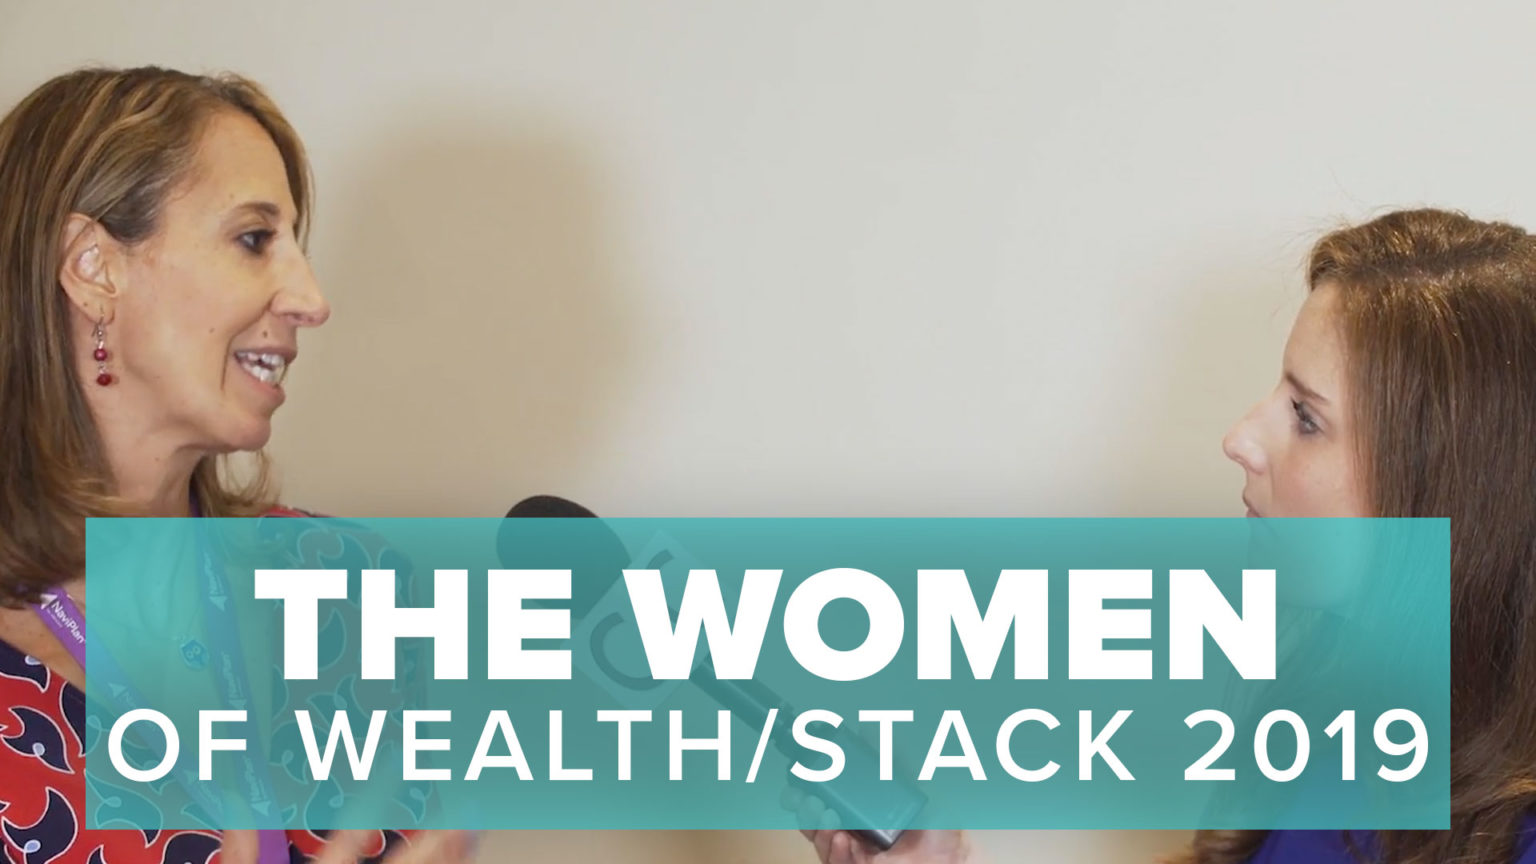 Wealth/Stack 2019: Female industry leaders talk technology and innovation